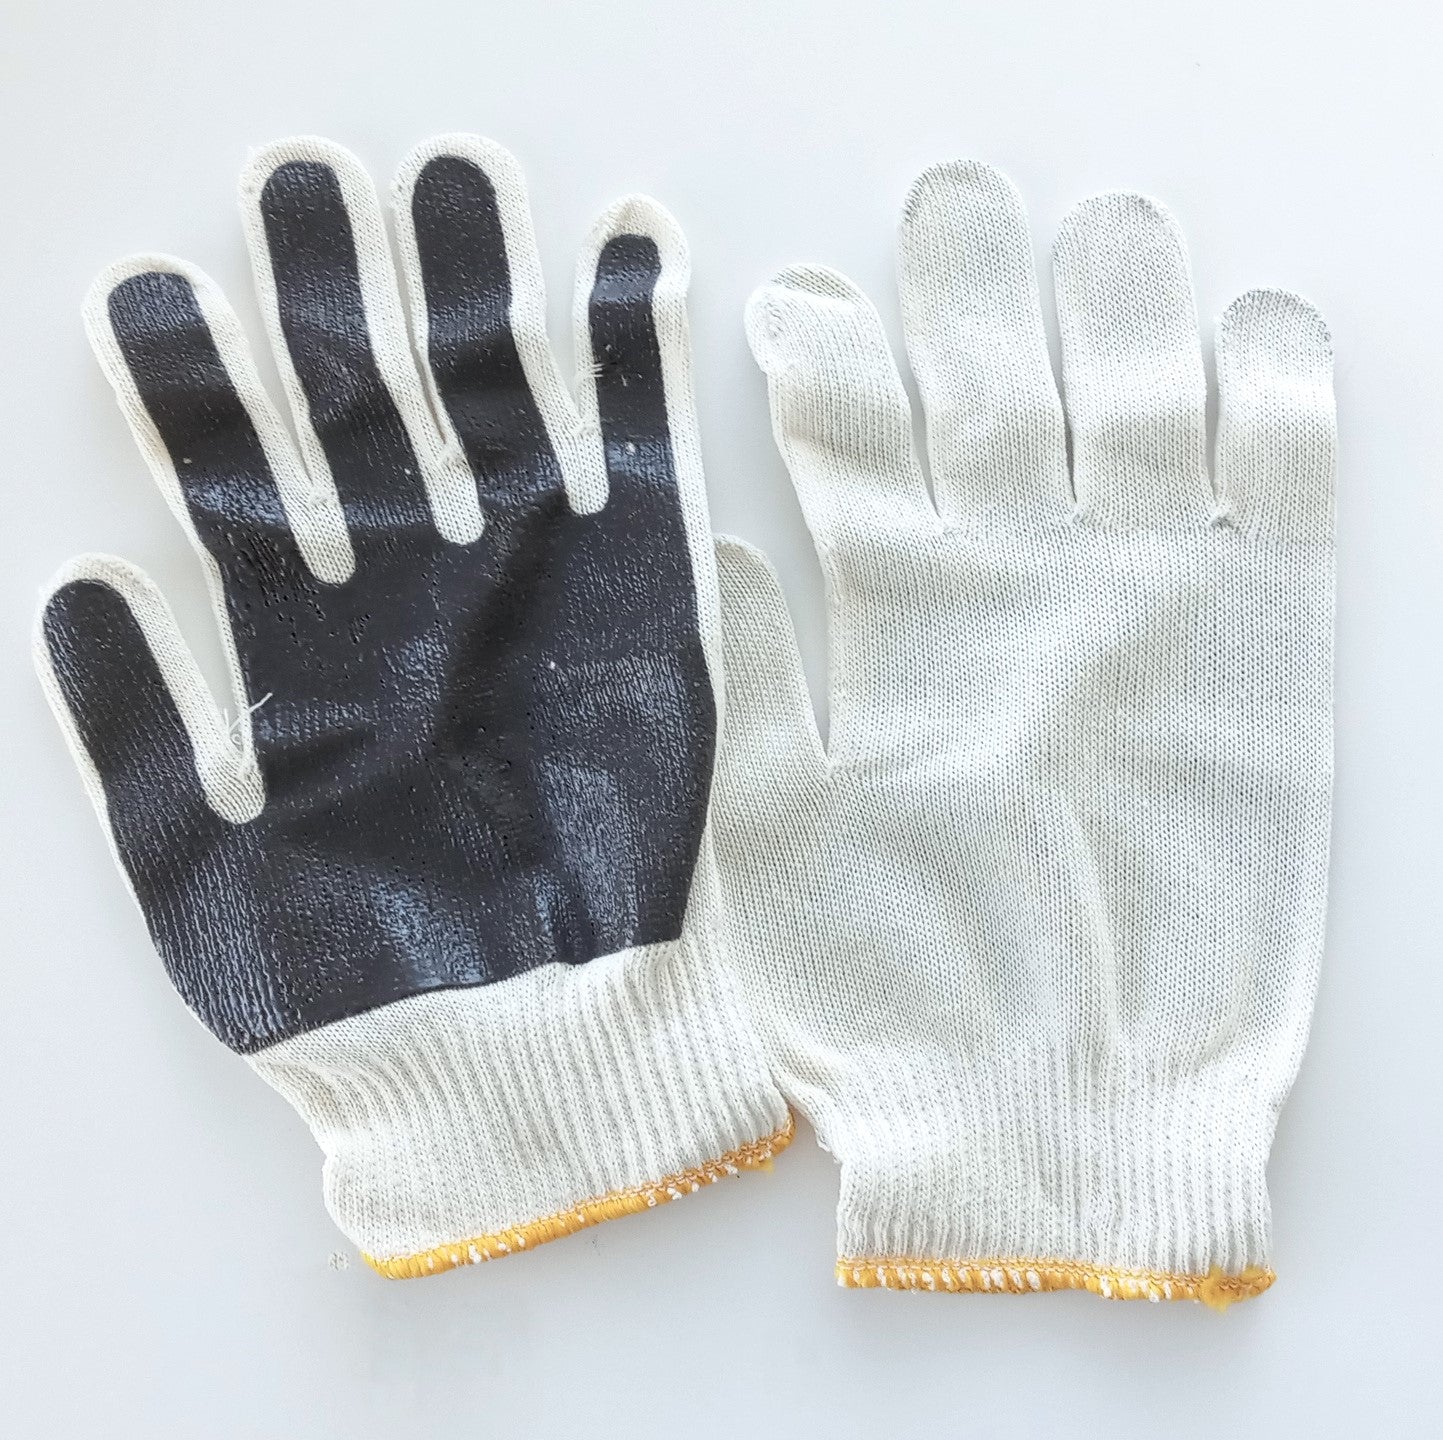 RN26297 Thin Knit Work Gloves Cotton/Polyester (12 Pairs)